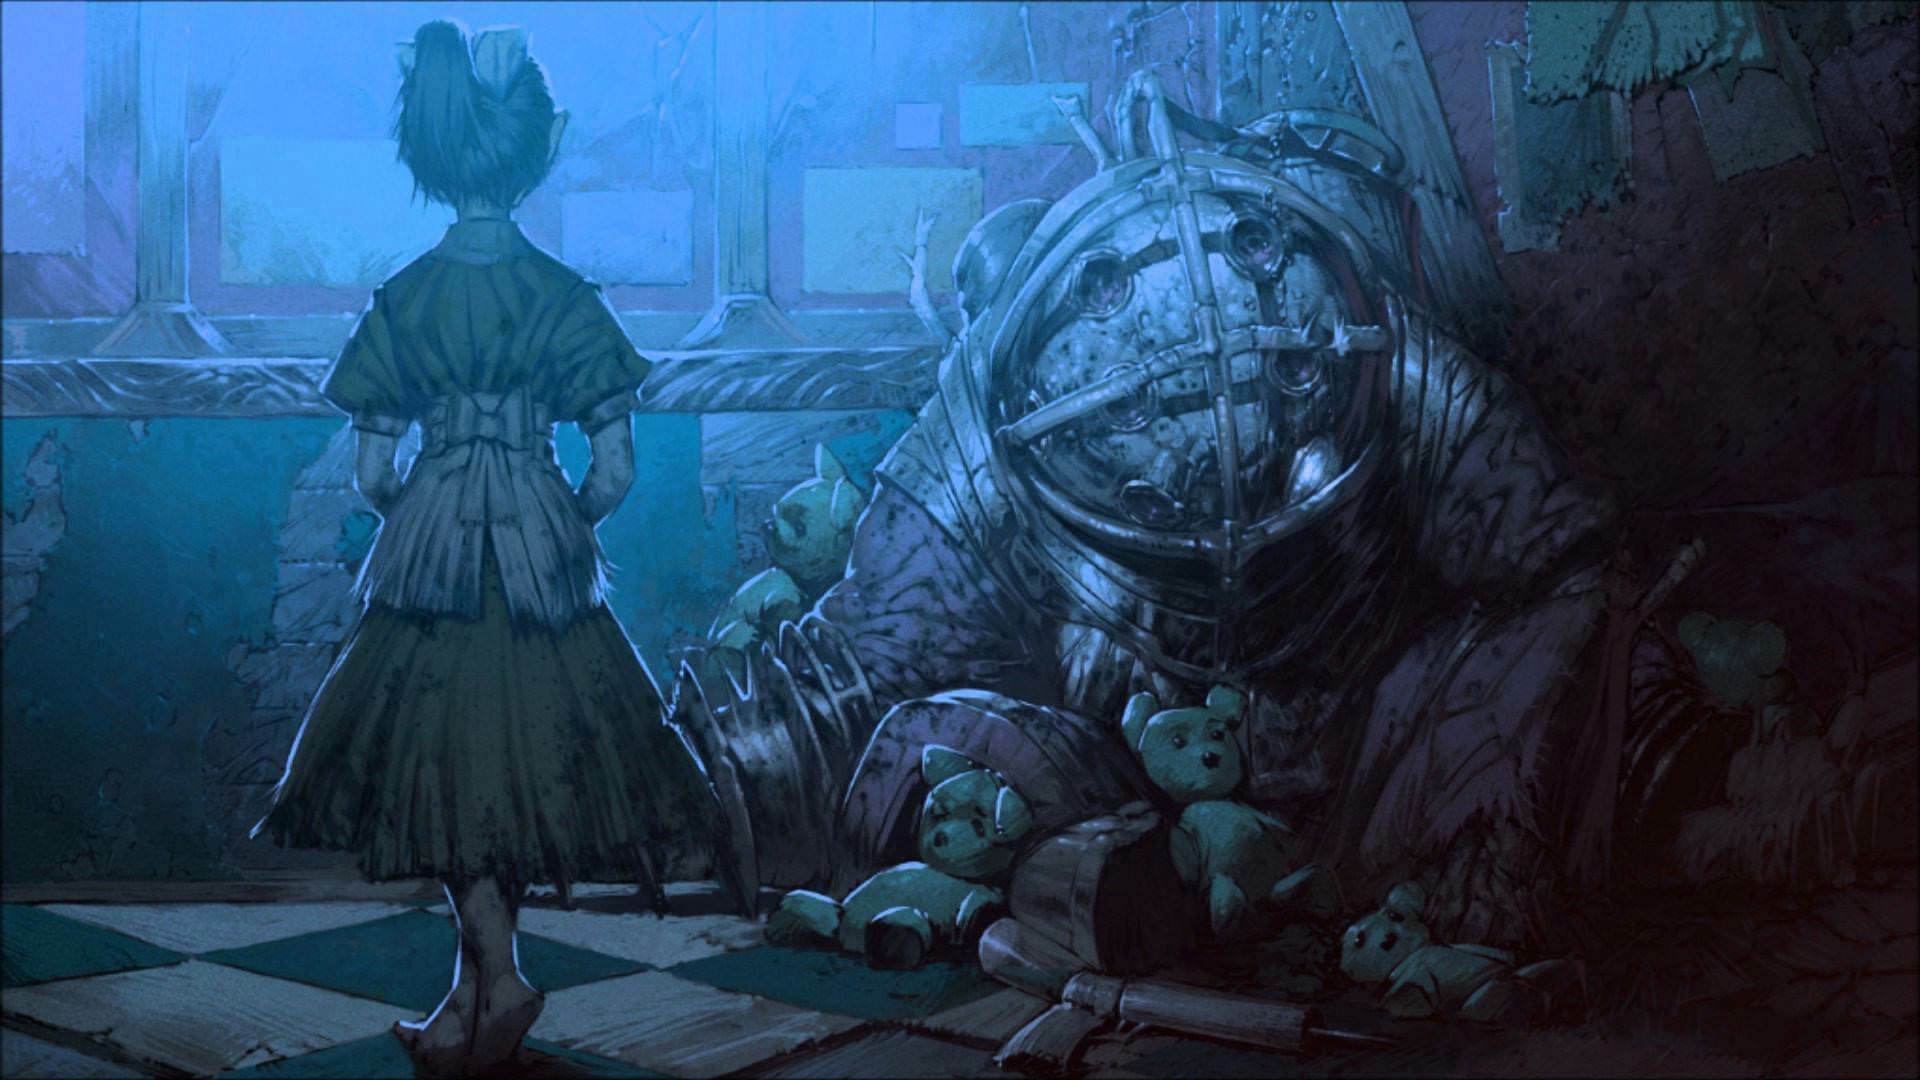 BioShock: A retro-futuristic game, First-person shooting, Role-playing mechanics. 1920x1080 Full HD Background.